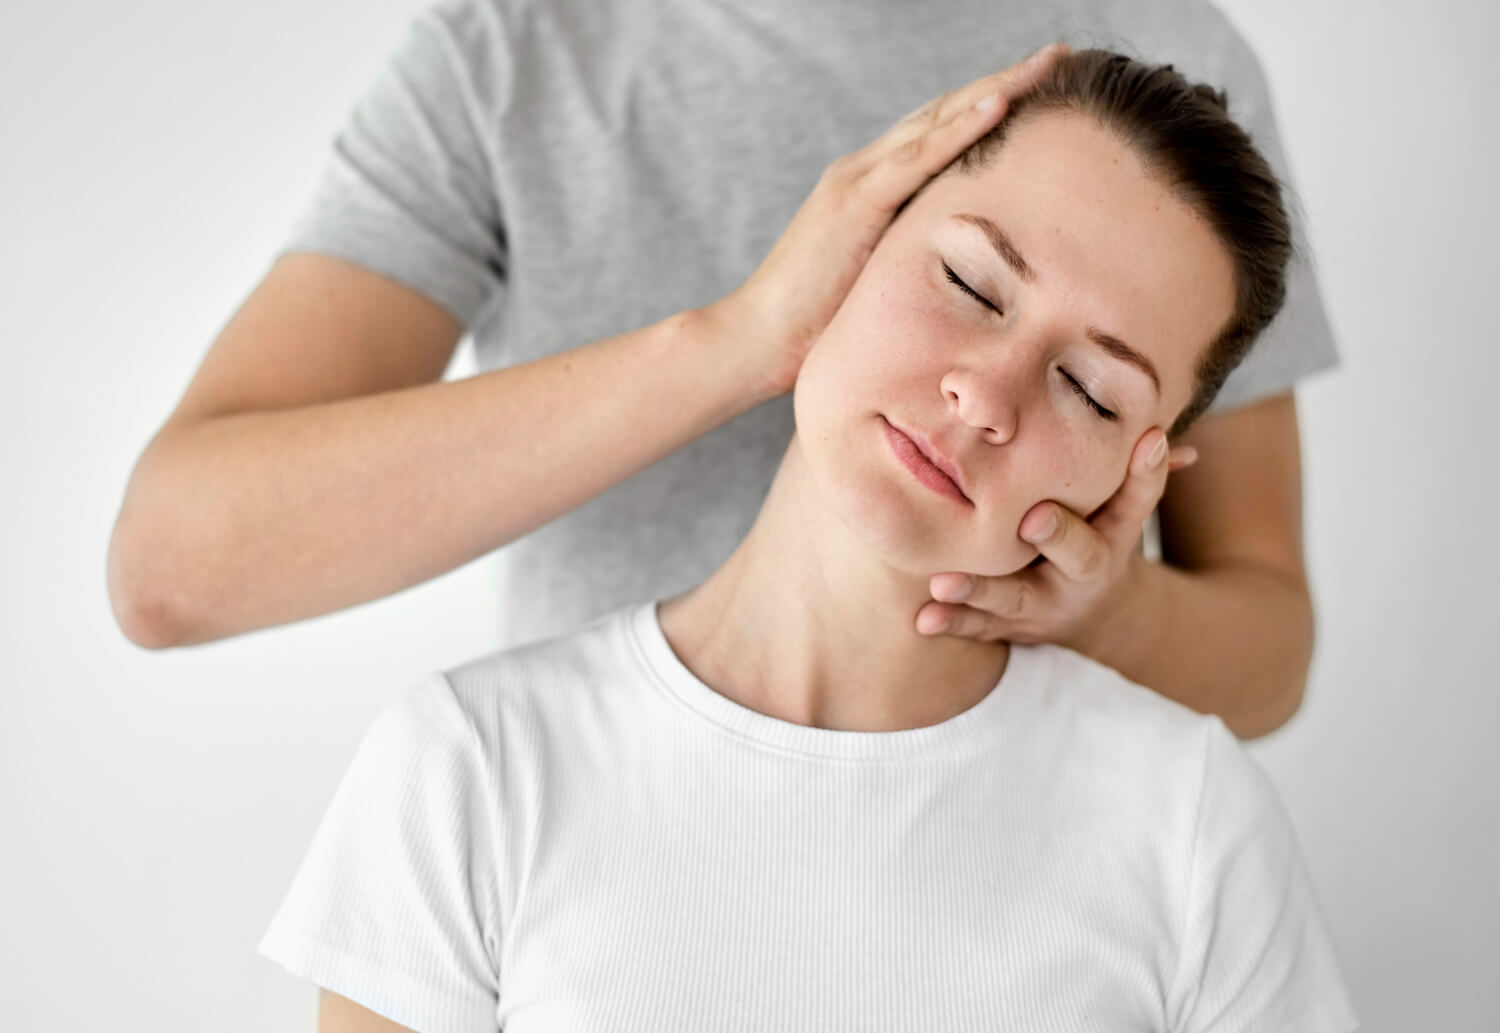 What is Headache Physiotherapy Treatment?